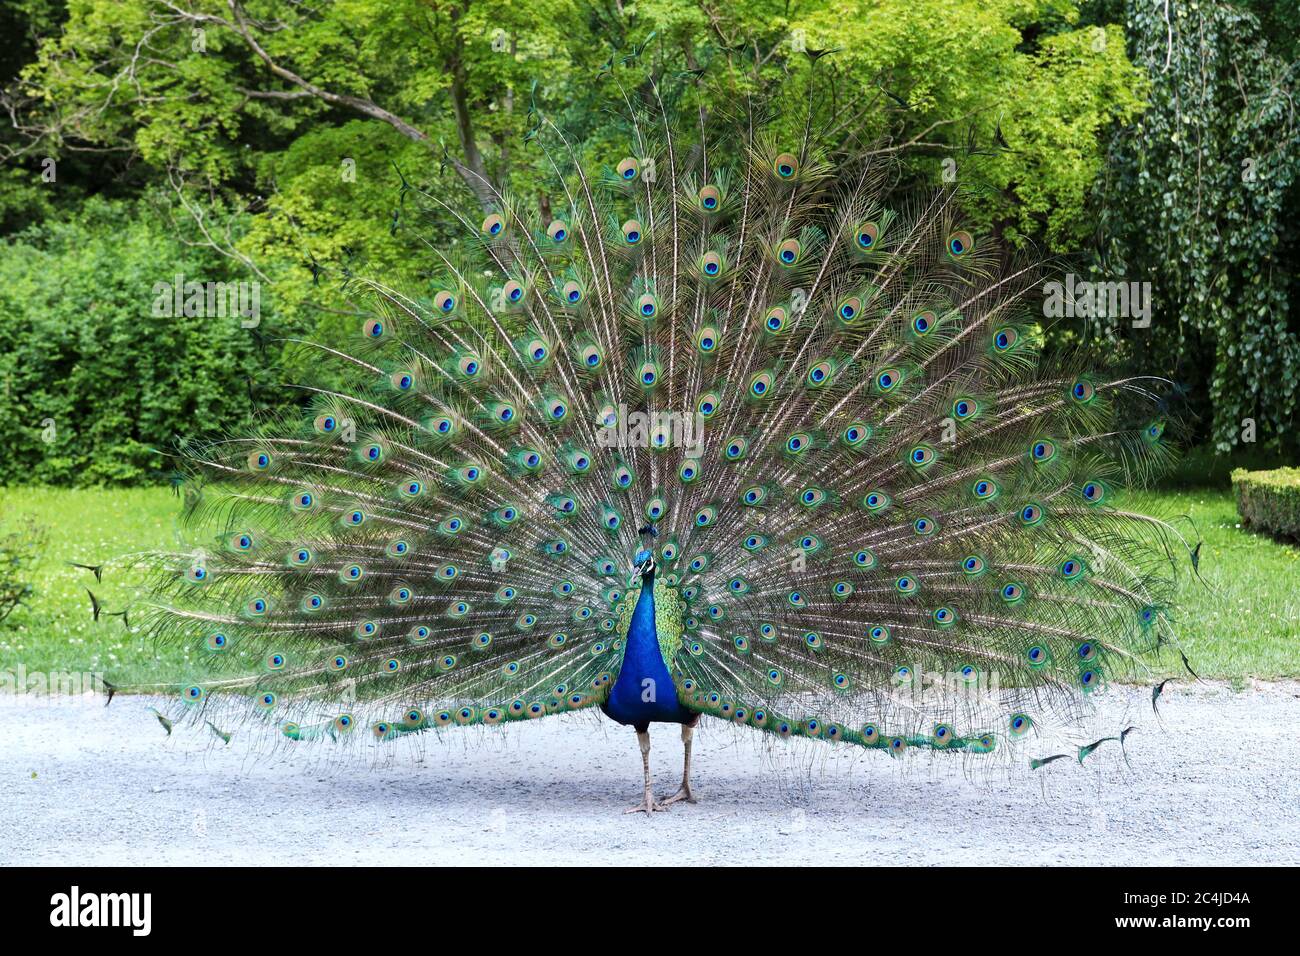 Proud peacock showing its long tail with beautiful feathers with eye-like markings Stock Photo